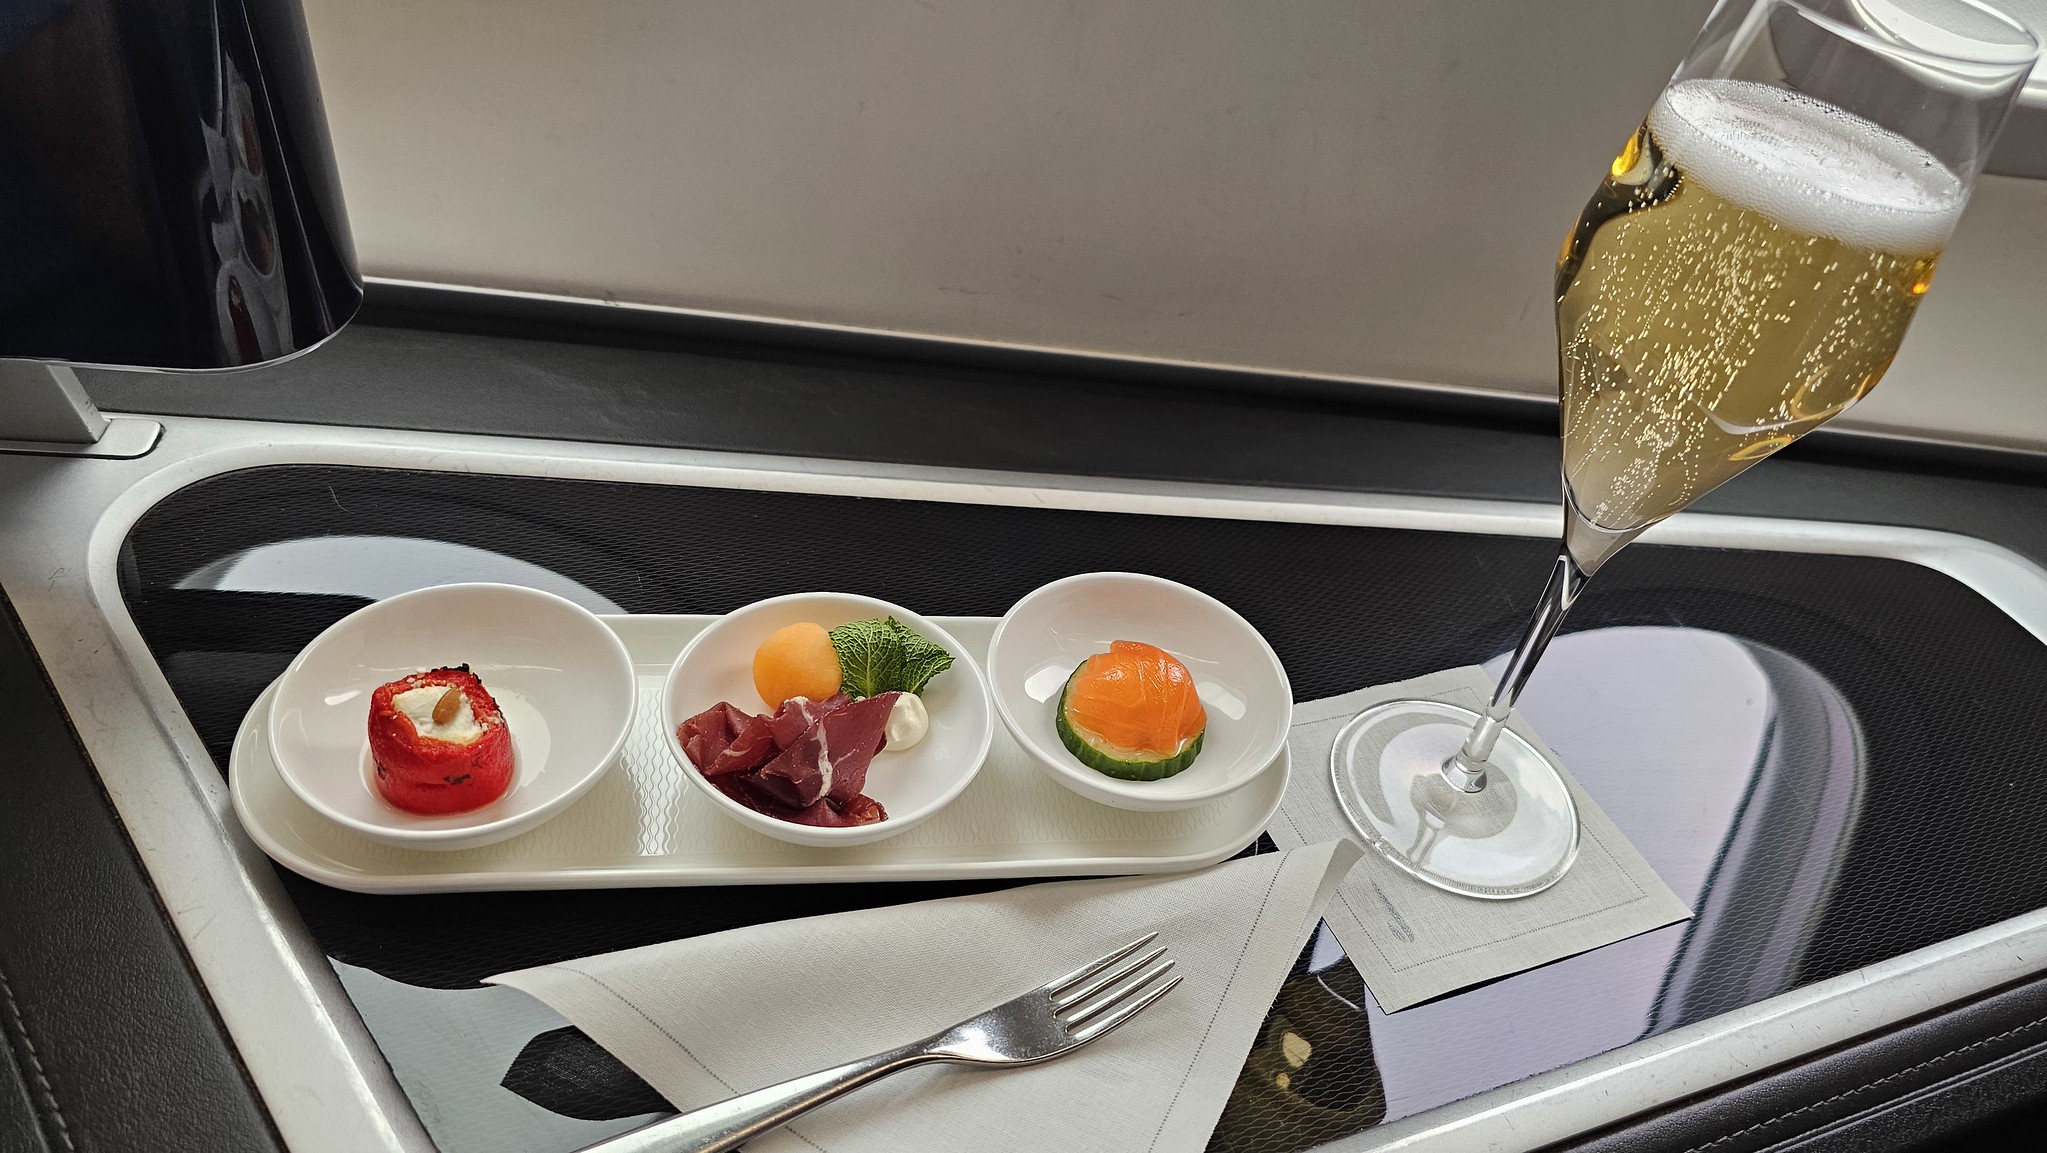 The amuse bouche served on the BA flight to Boston